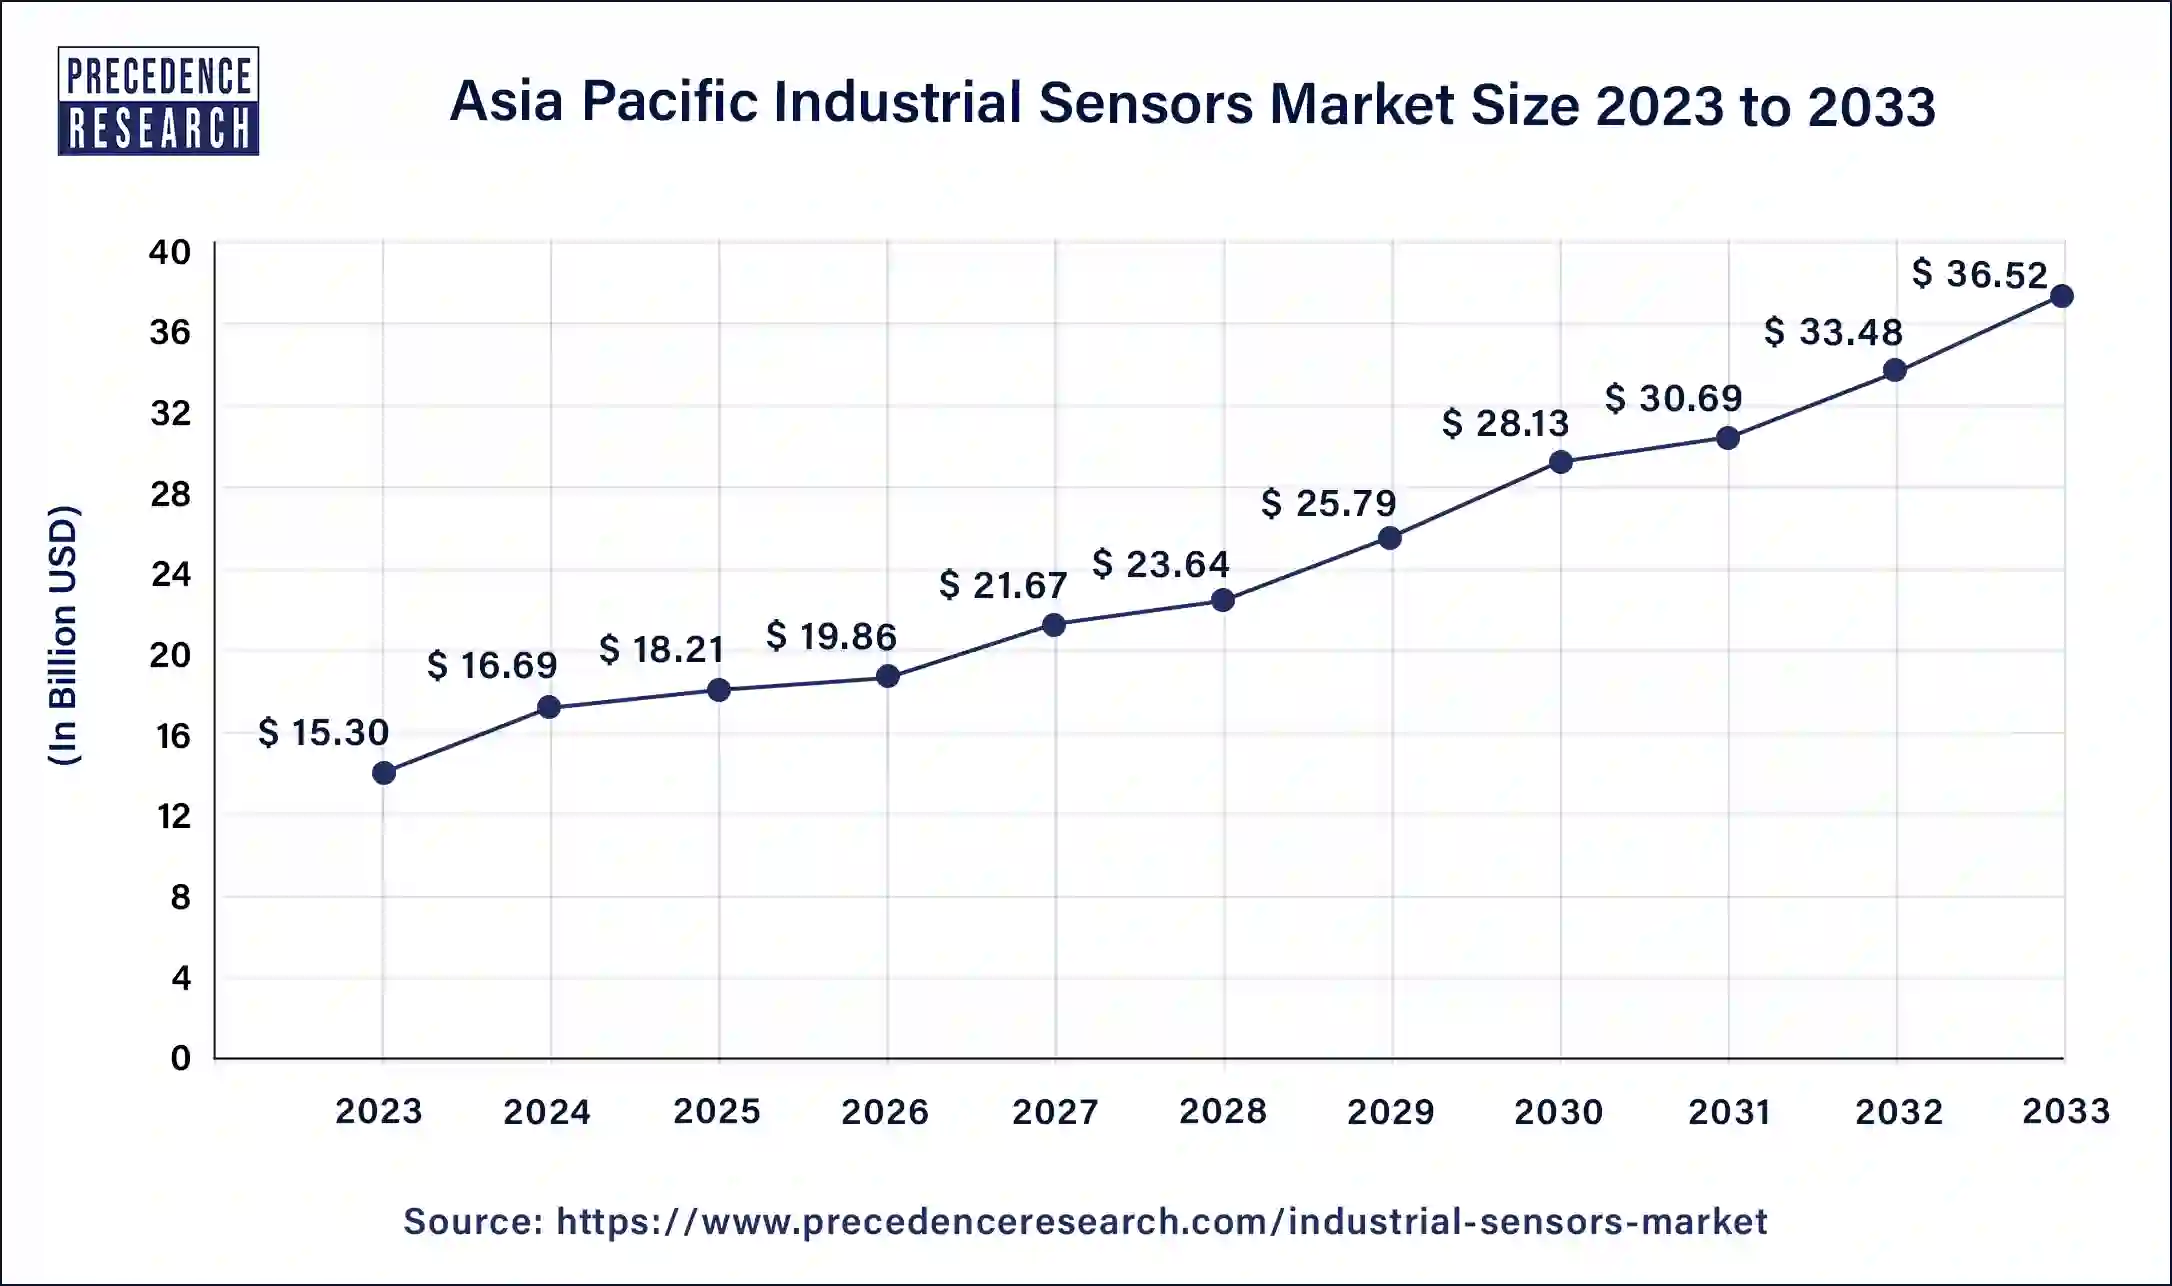 Asia Pacific Industrial Sensors Market Size 2024 to 2033